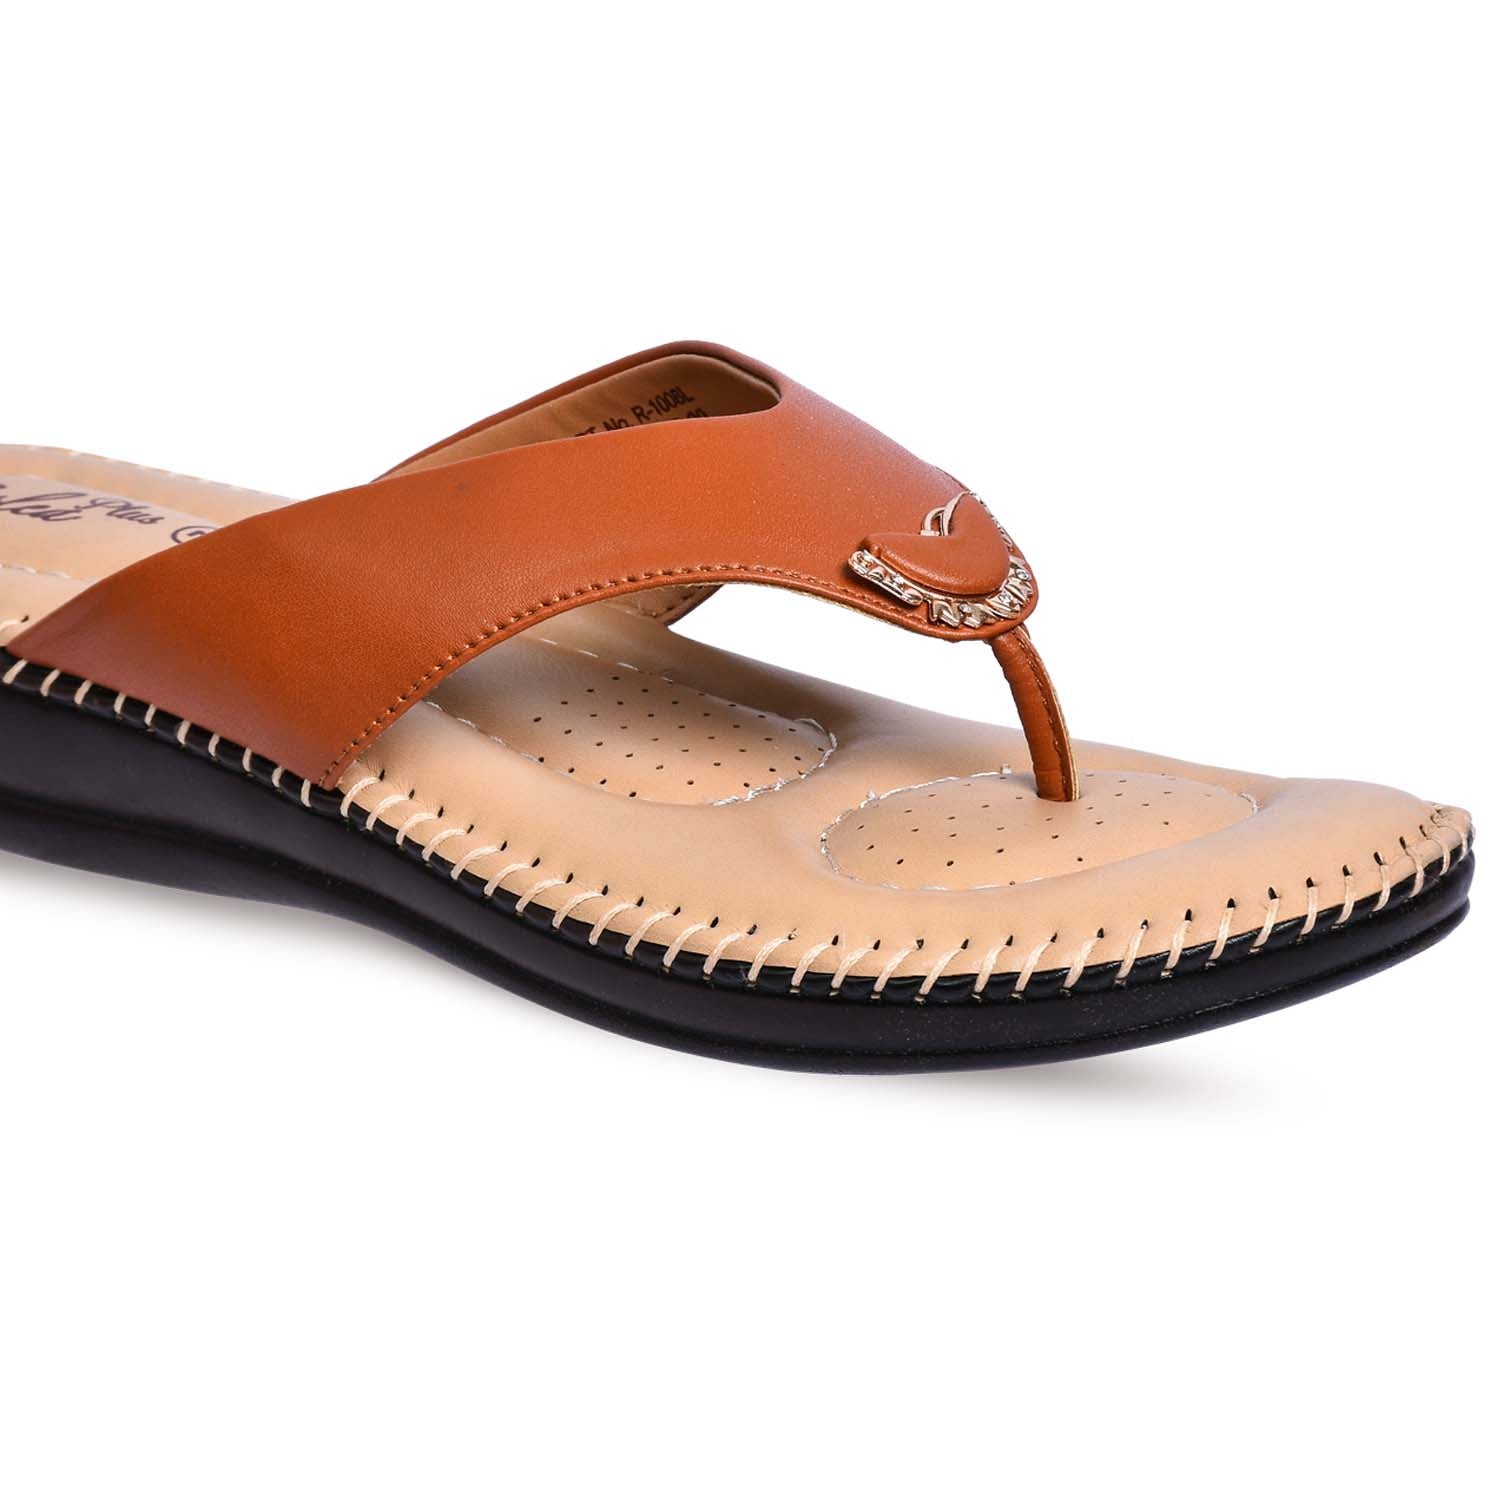 Paragon R1008L Women Sandals | Casual &amp; Formal Sandals | Stylish, Comfortable &amp; Durable | For Daily &amp; Occasion Wear